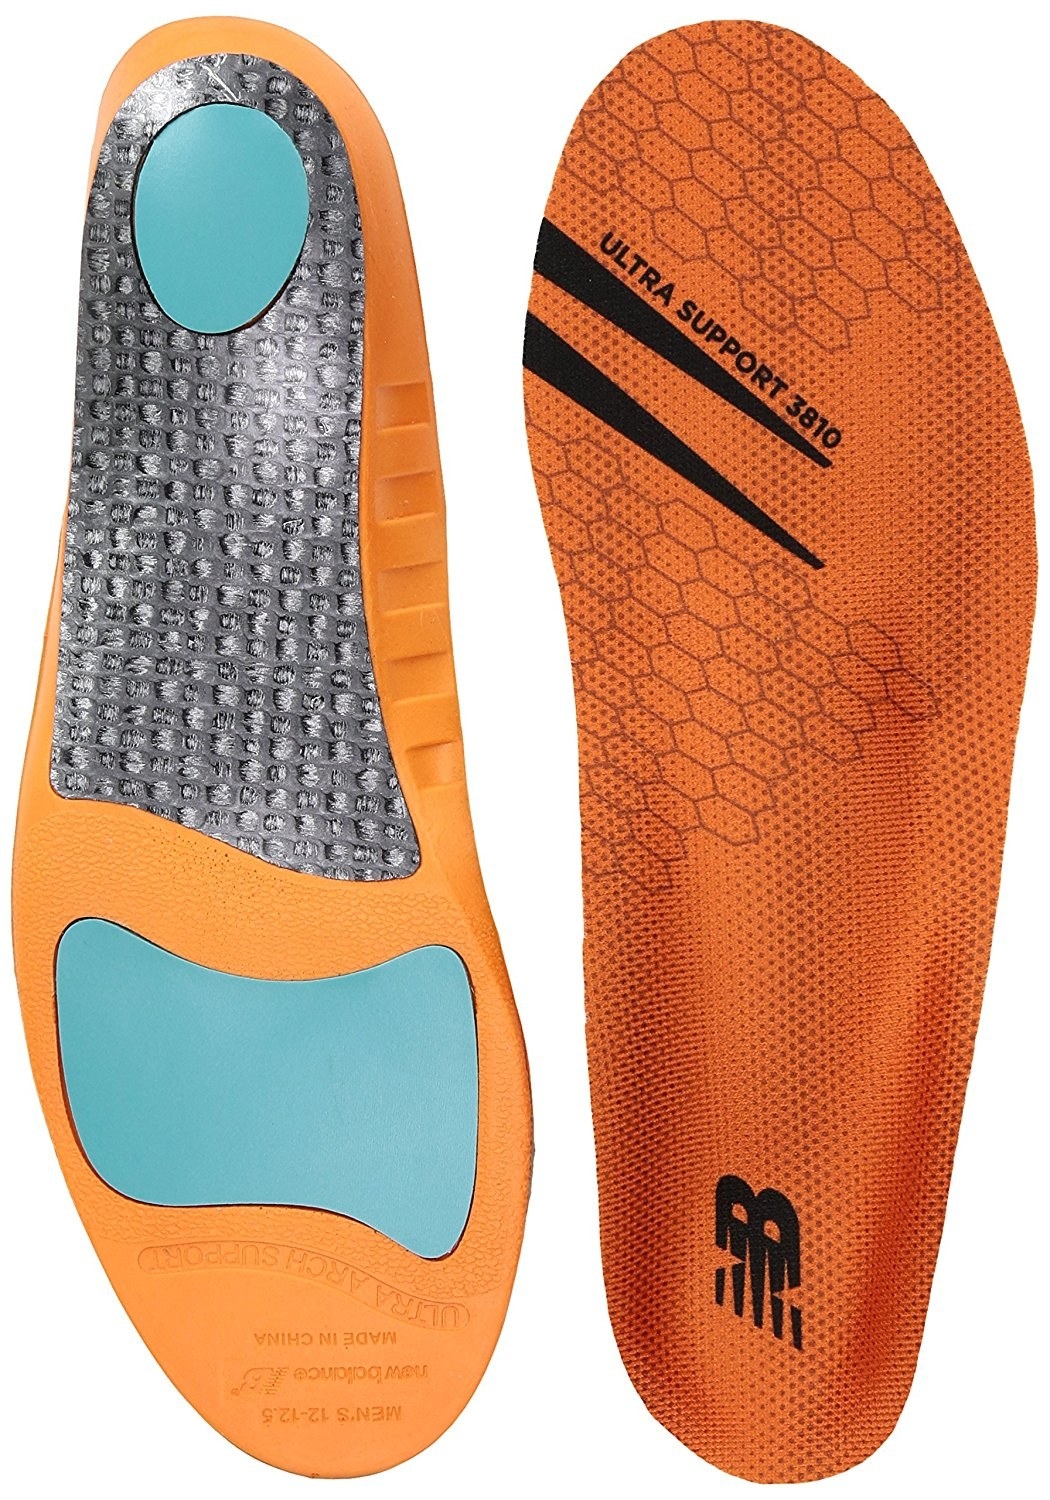 special insoles for shoes